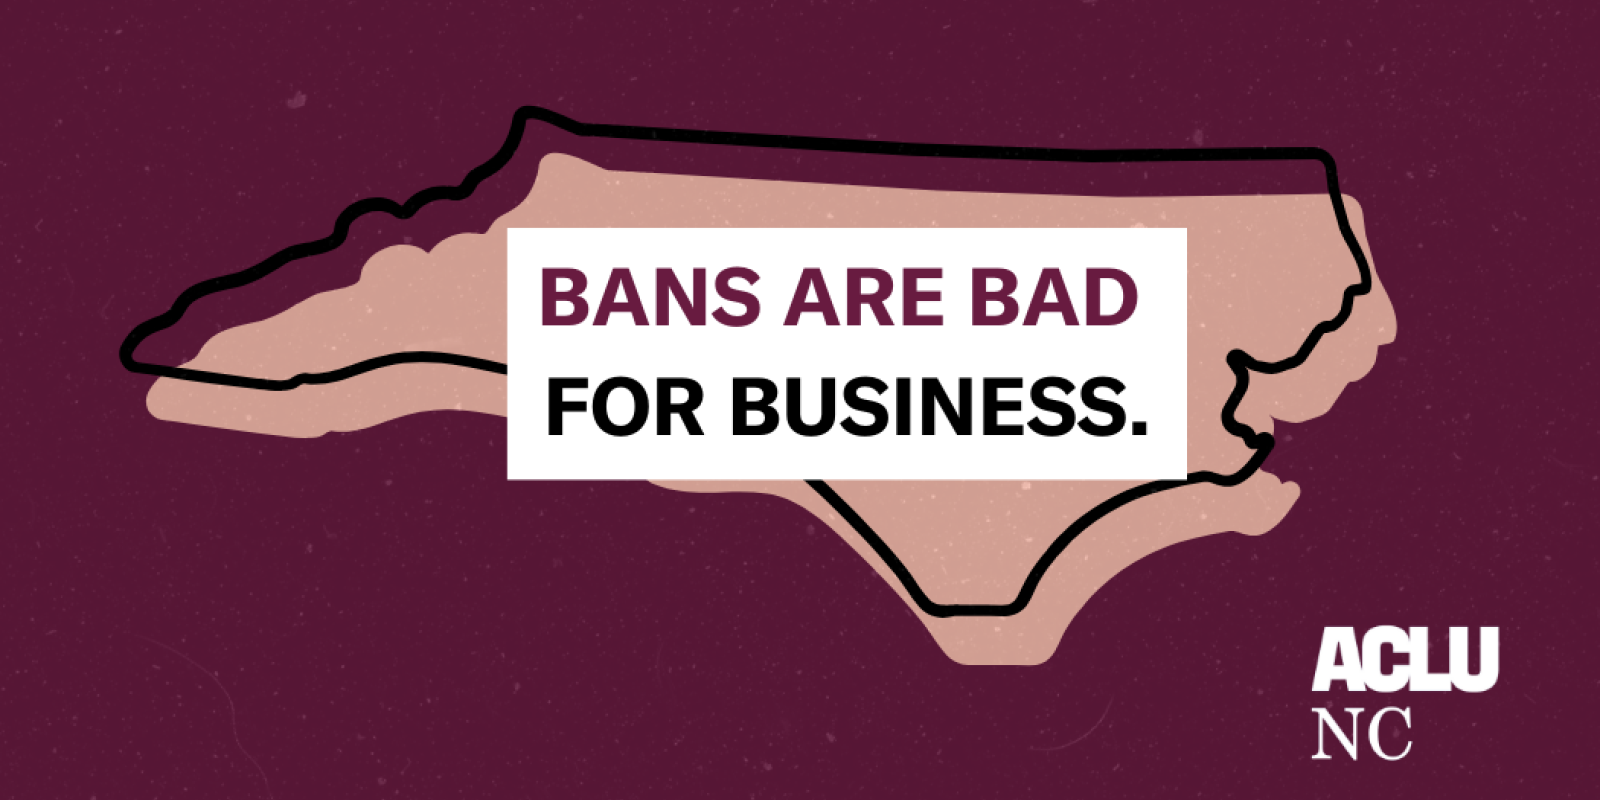 Image text: "Bans are bad for business." Image of North Carolina state outline in the background.